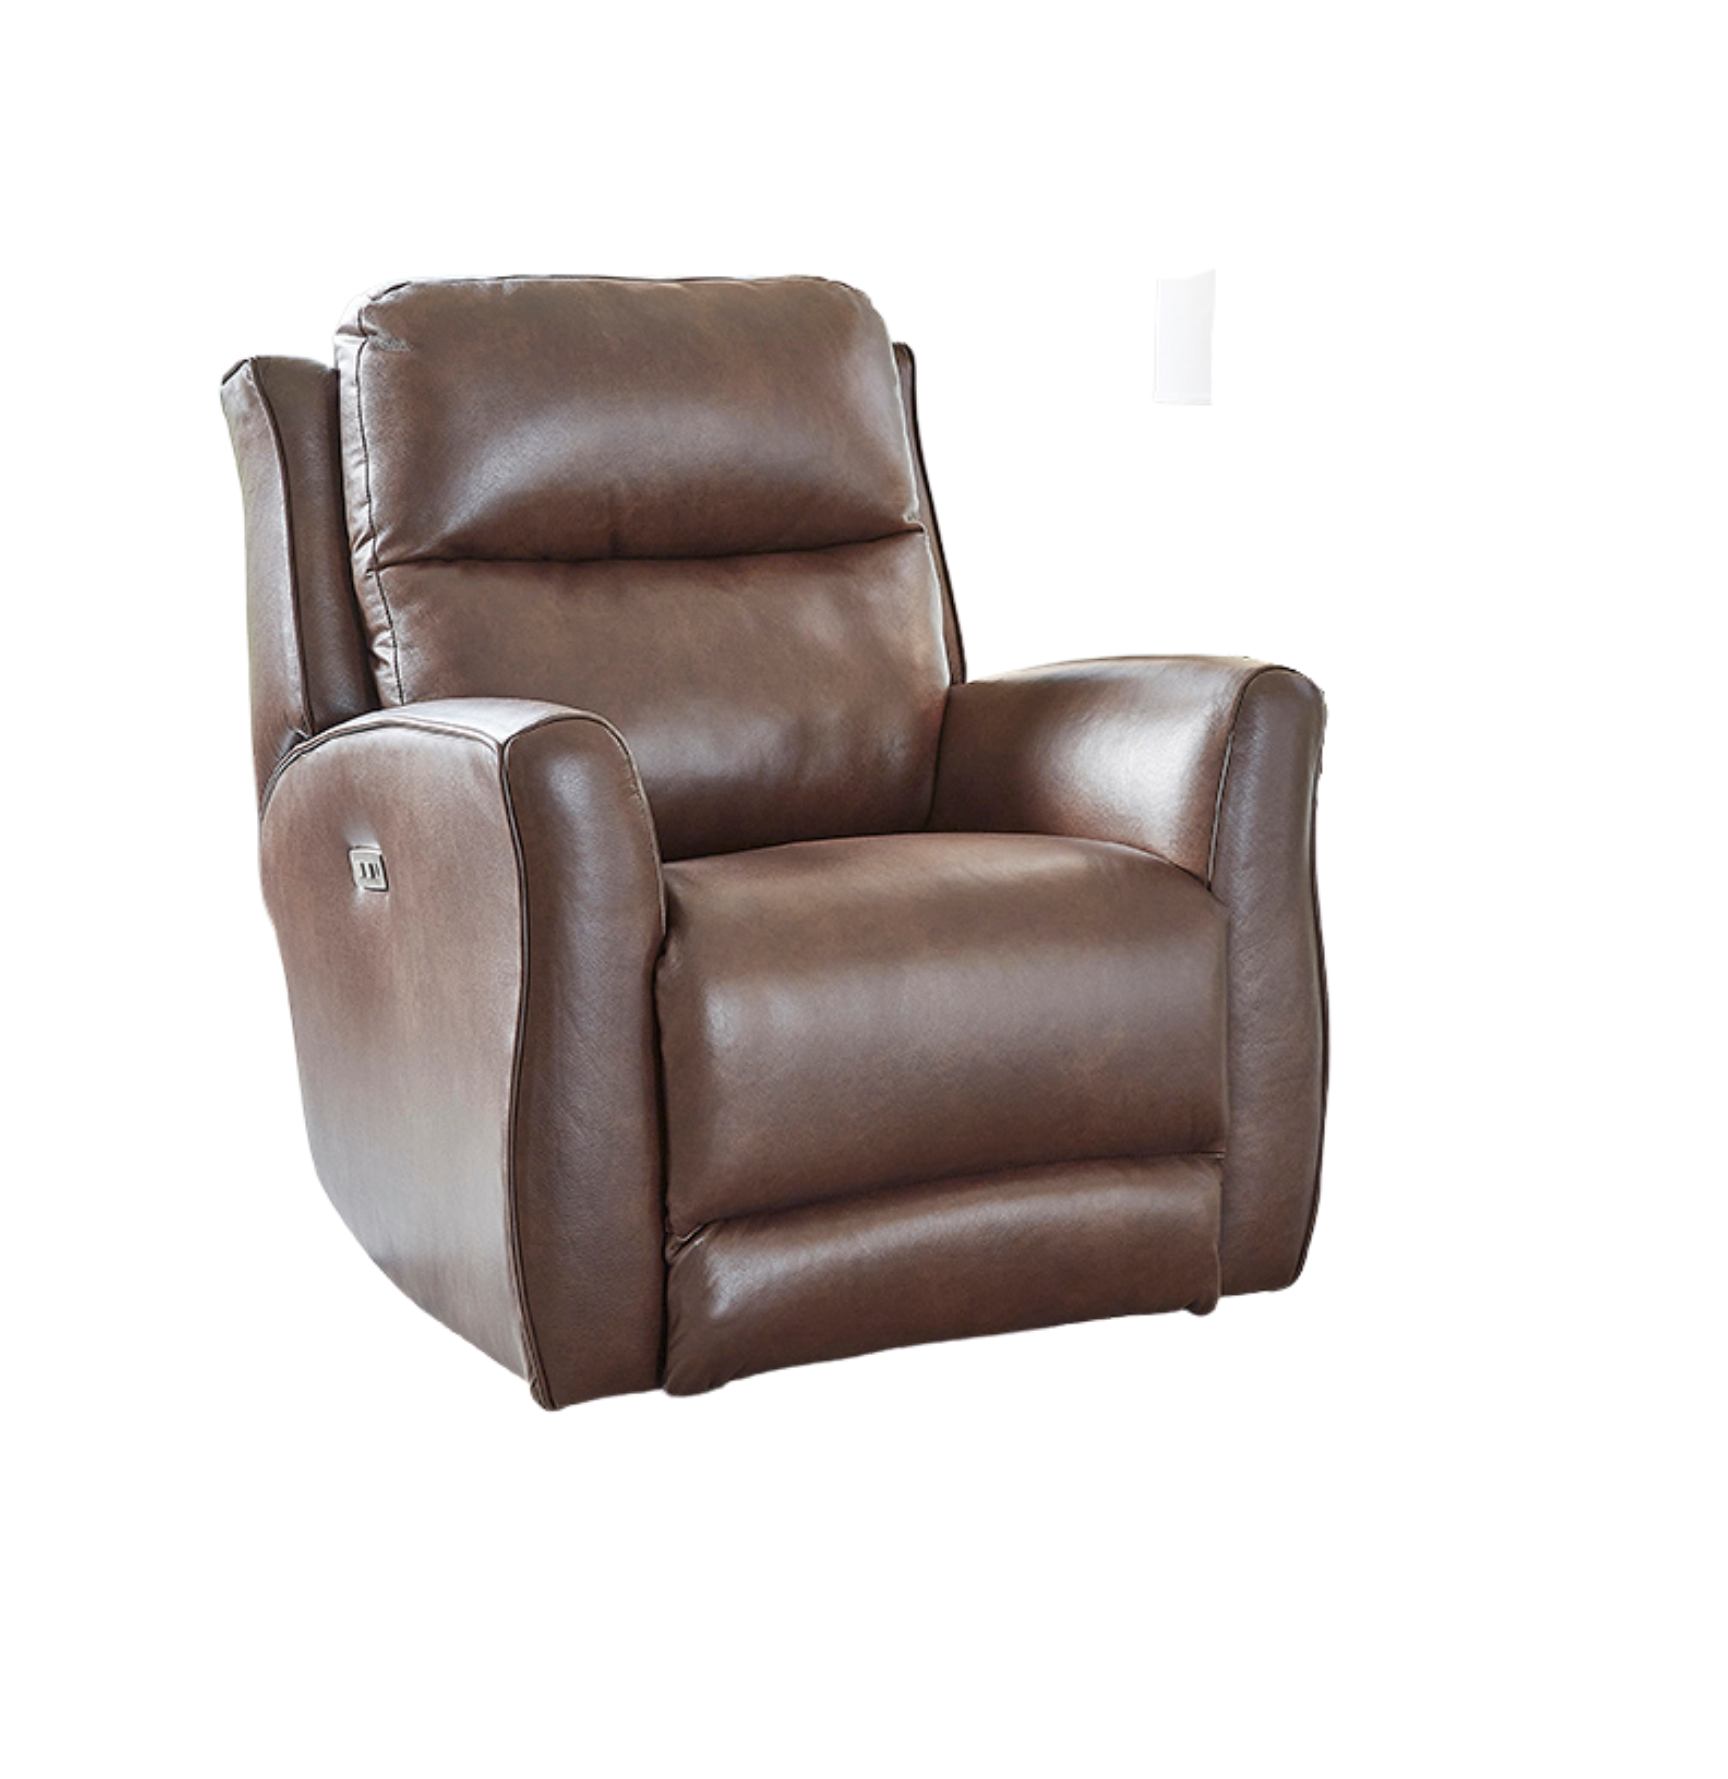 Southern Motion Furniture Selections, Leather Rocking Chair Recliner